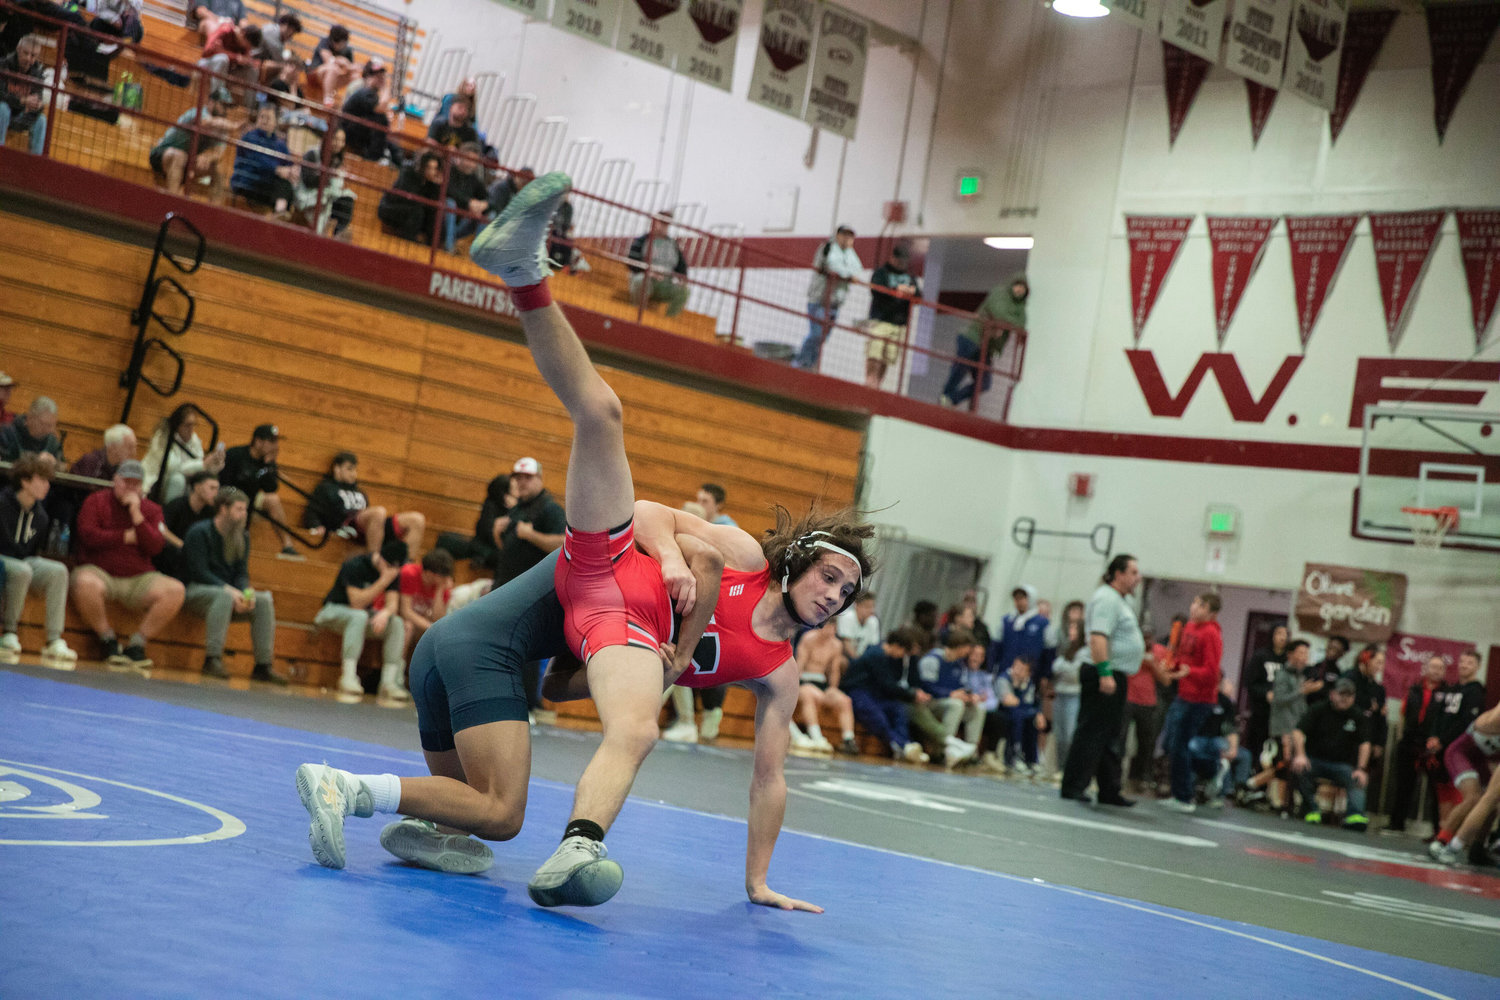 Yelm’s Wesley Thompson prepares for impact while wrestling at 113 in Chehalis Saturday night during the Bearcat Invitational.